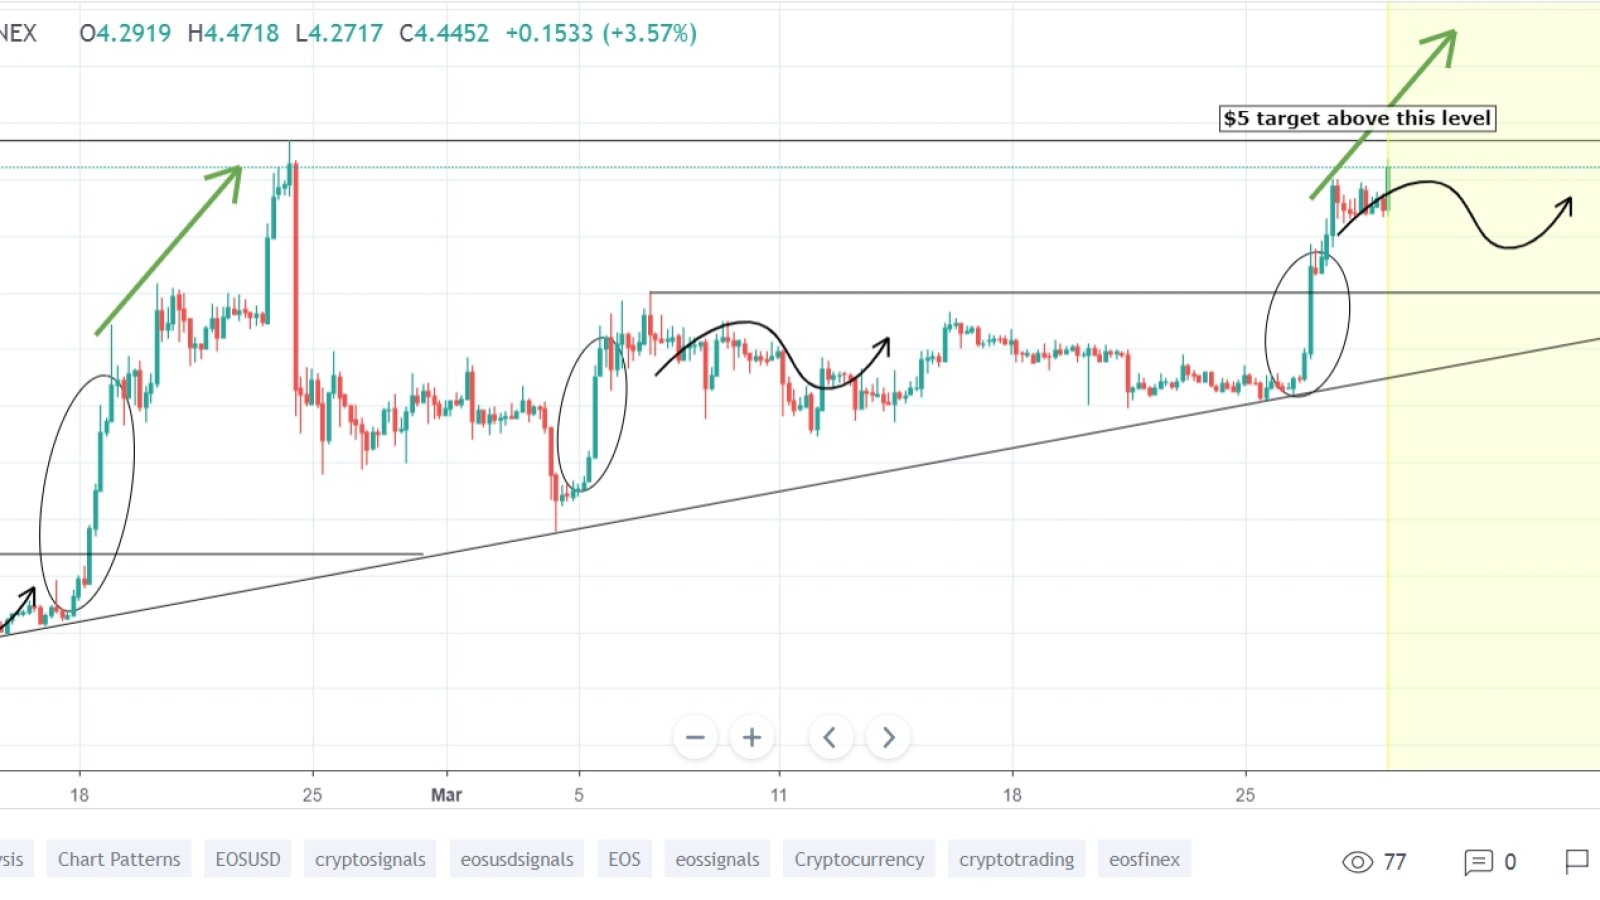 If EOS breaks $4.5 resistance, $5 price is possible